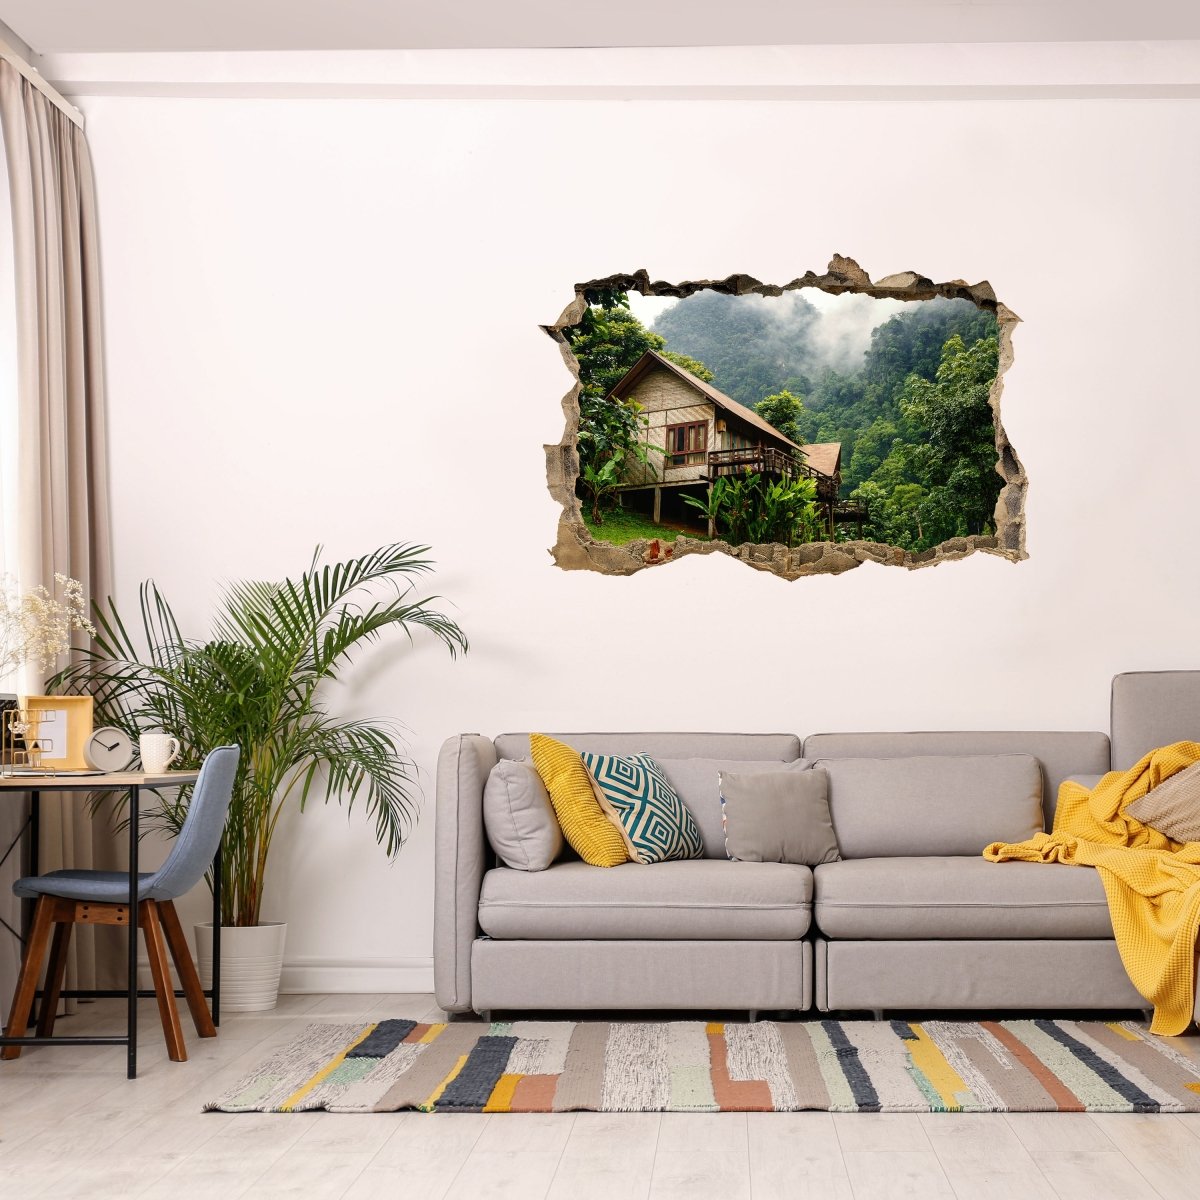 3D wall sticker hut in the mountains, jungle, palm trees - Wall Decal M1226